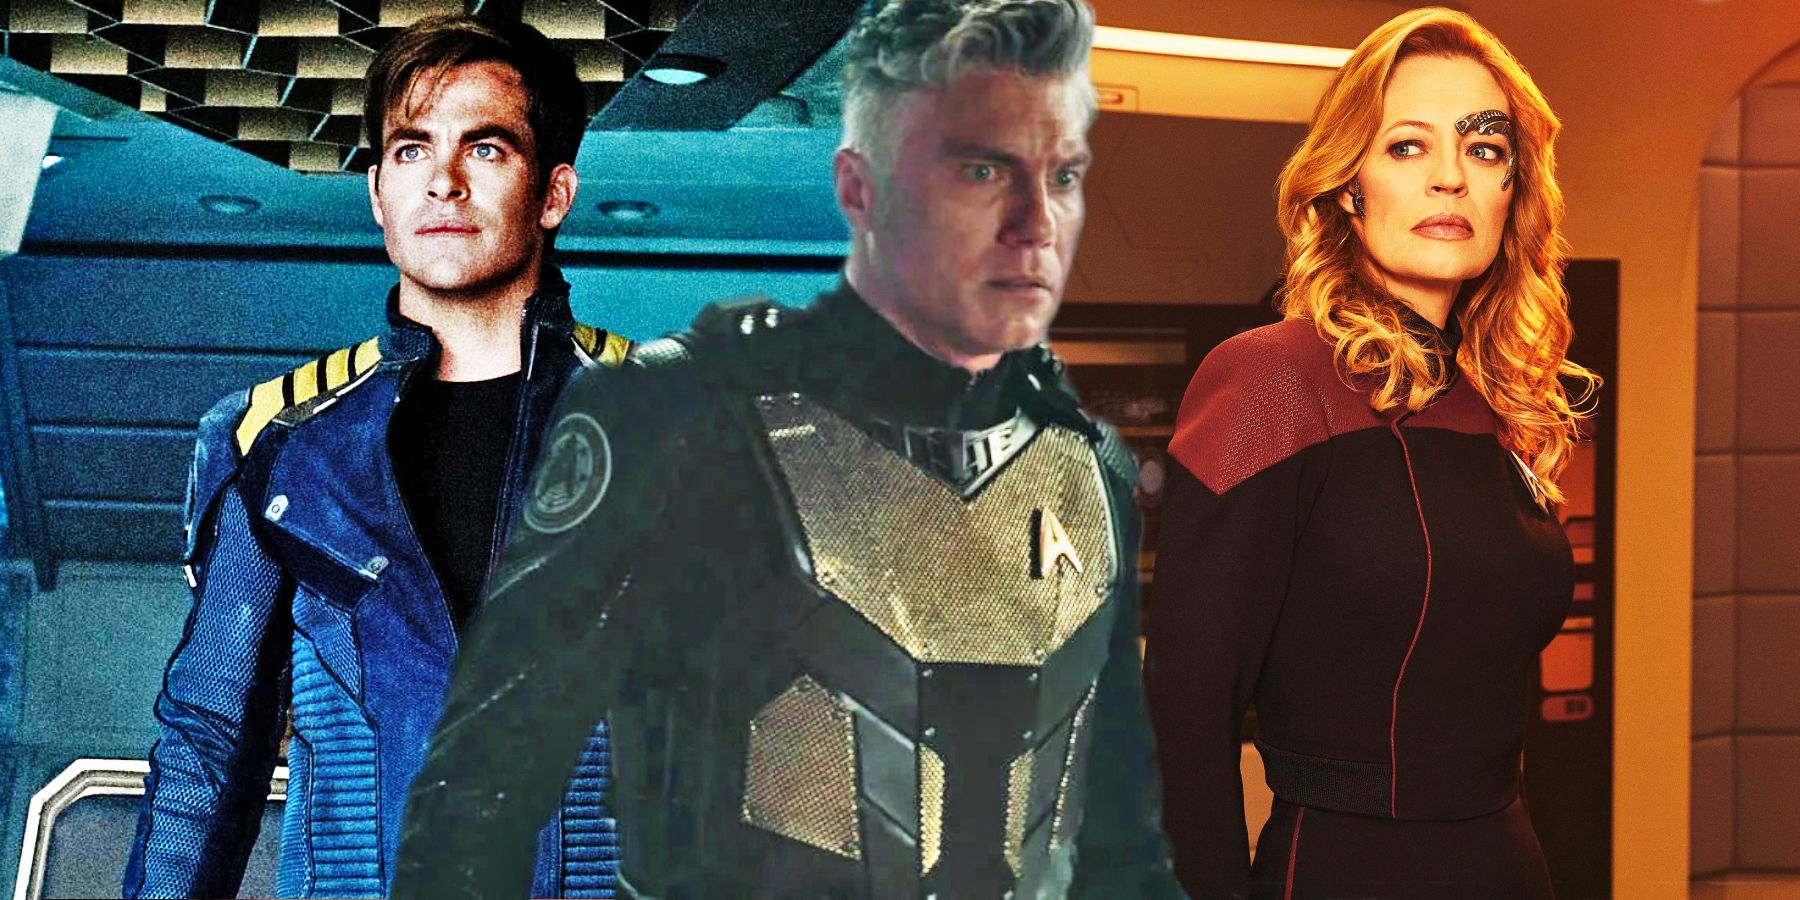 Chris Pine as Kirk, Anson Mount as Pike and Jeri Ryan as Seven of Nine, all looking concerned